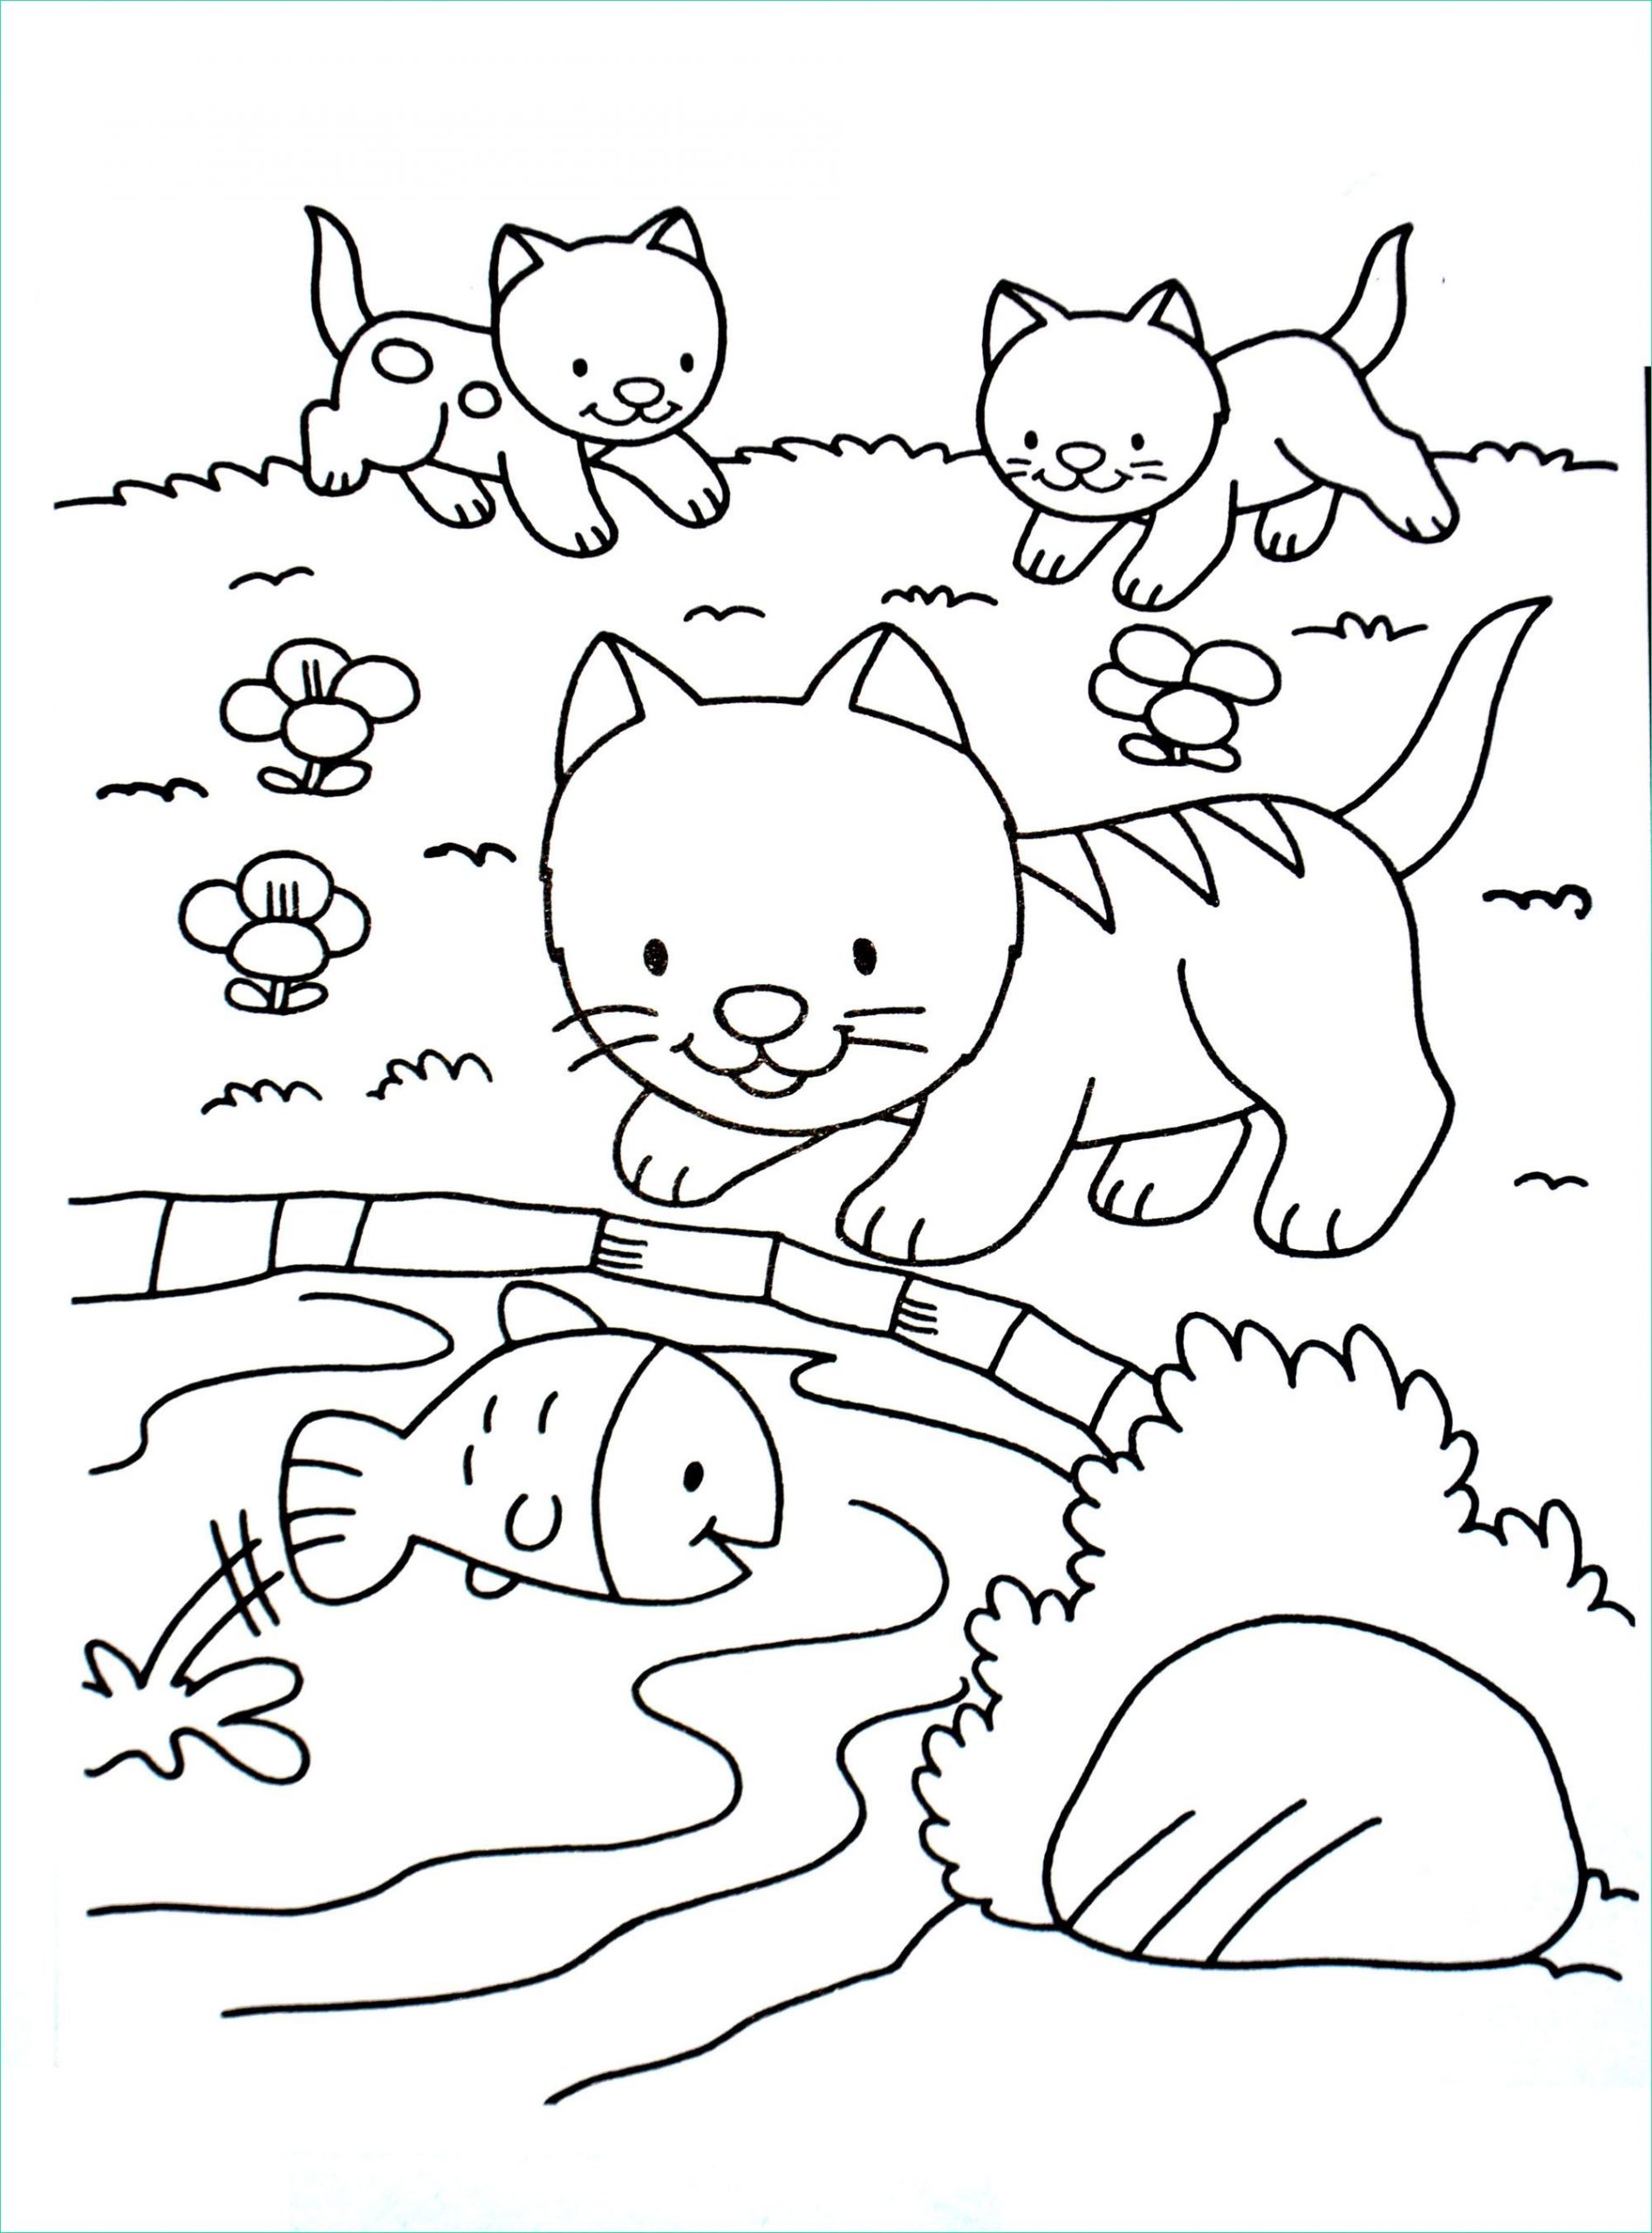 image=cats Coloring for kids cats 1